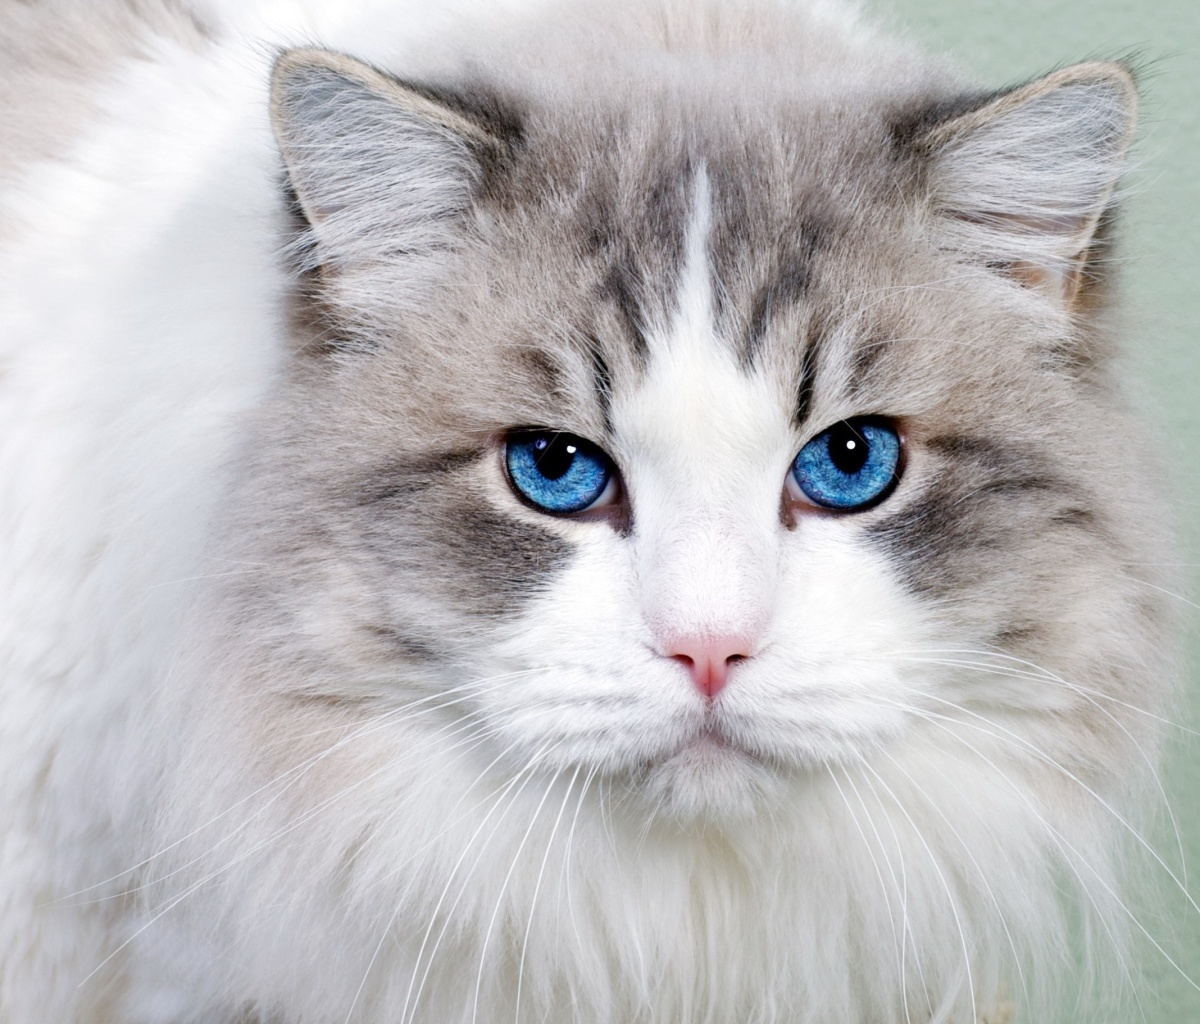 Cat with Blue Eyes wallpaper 1200x1024